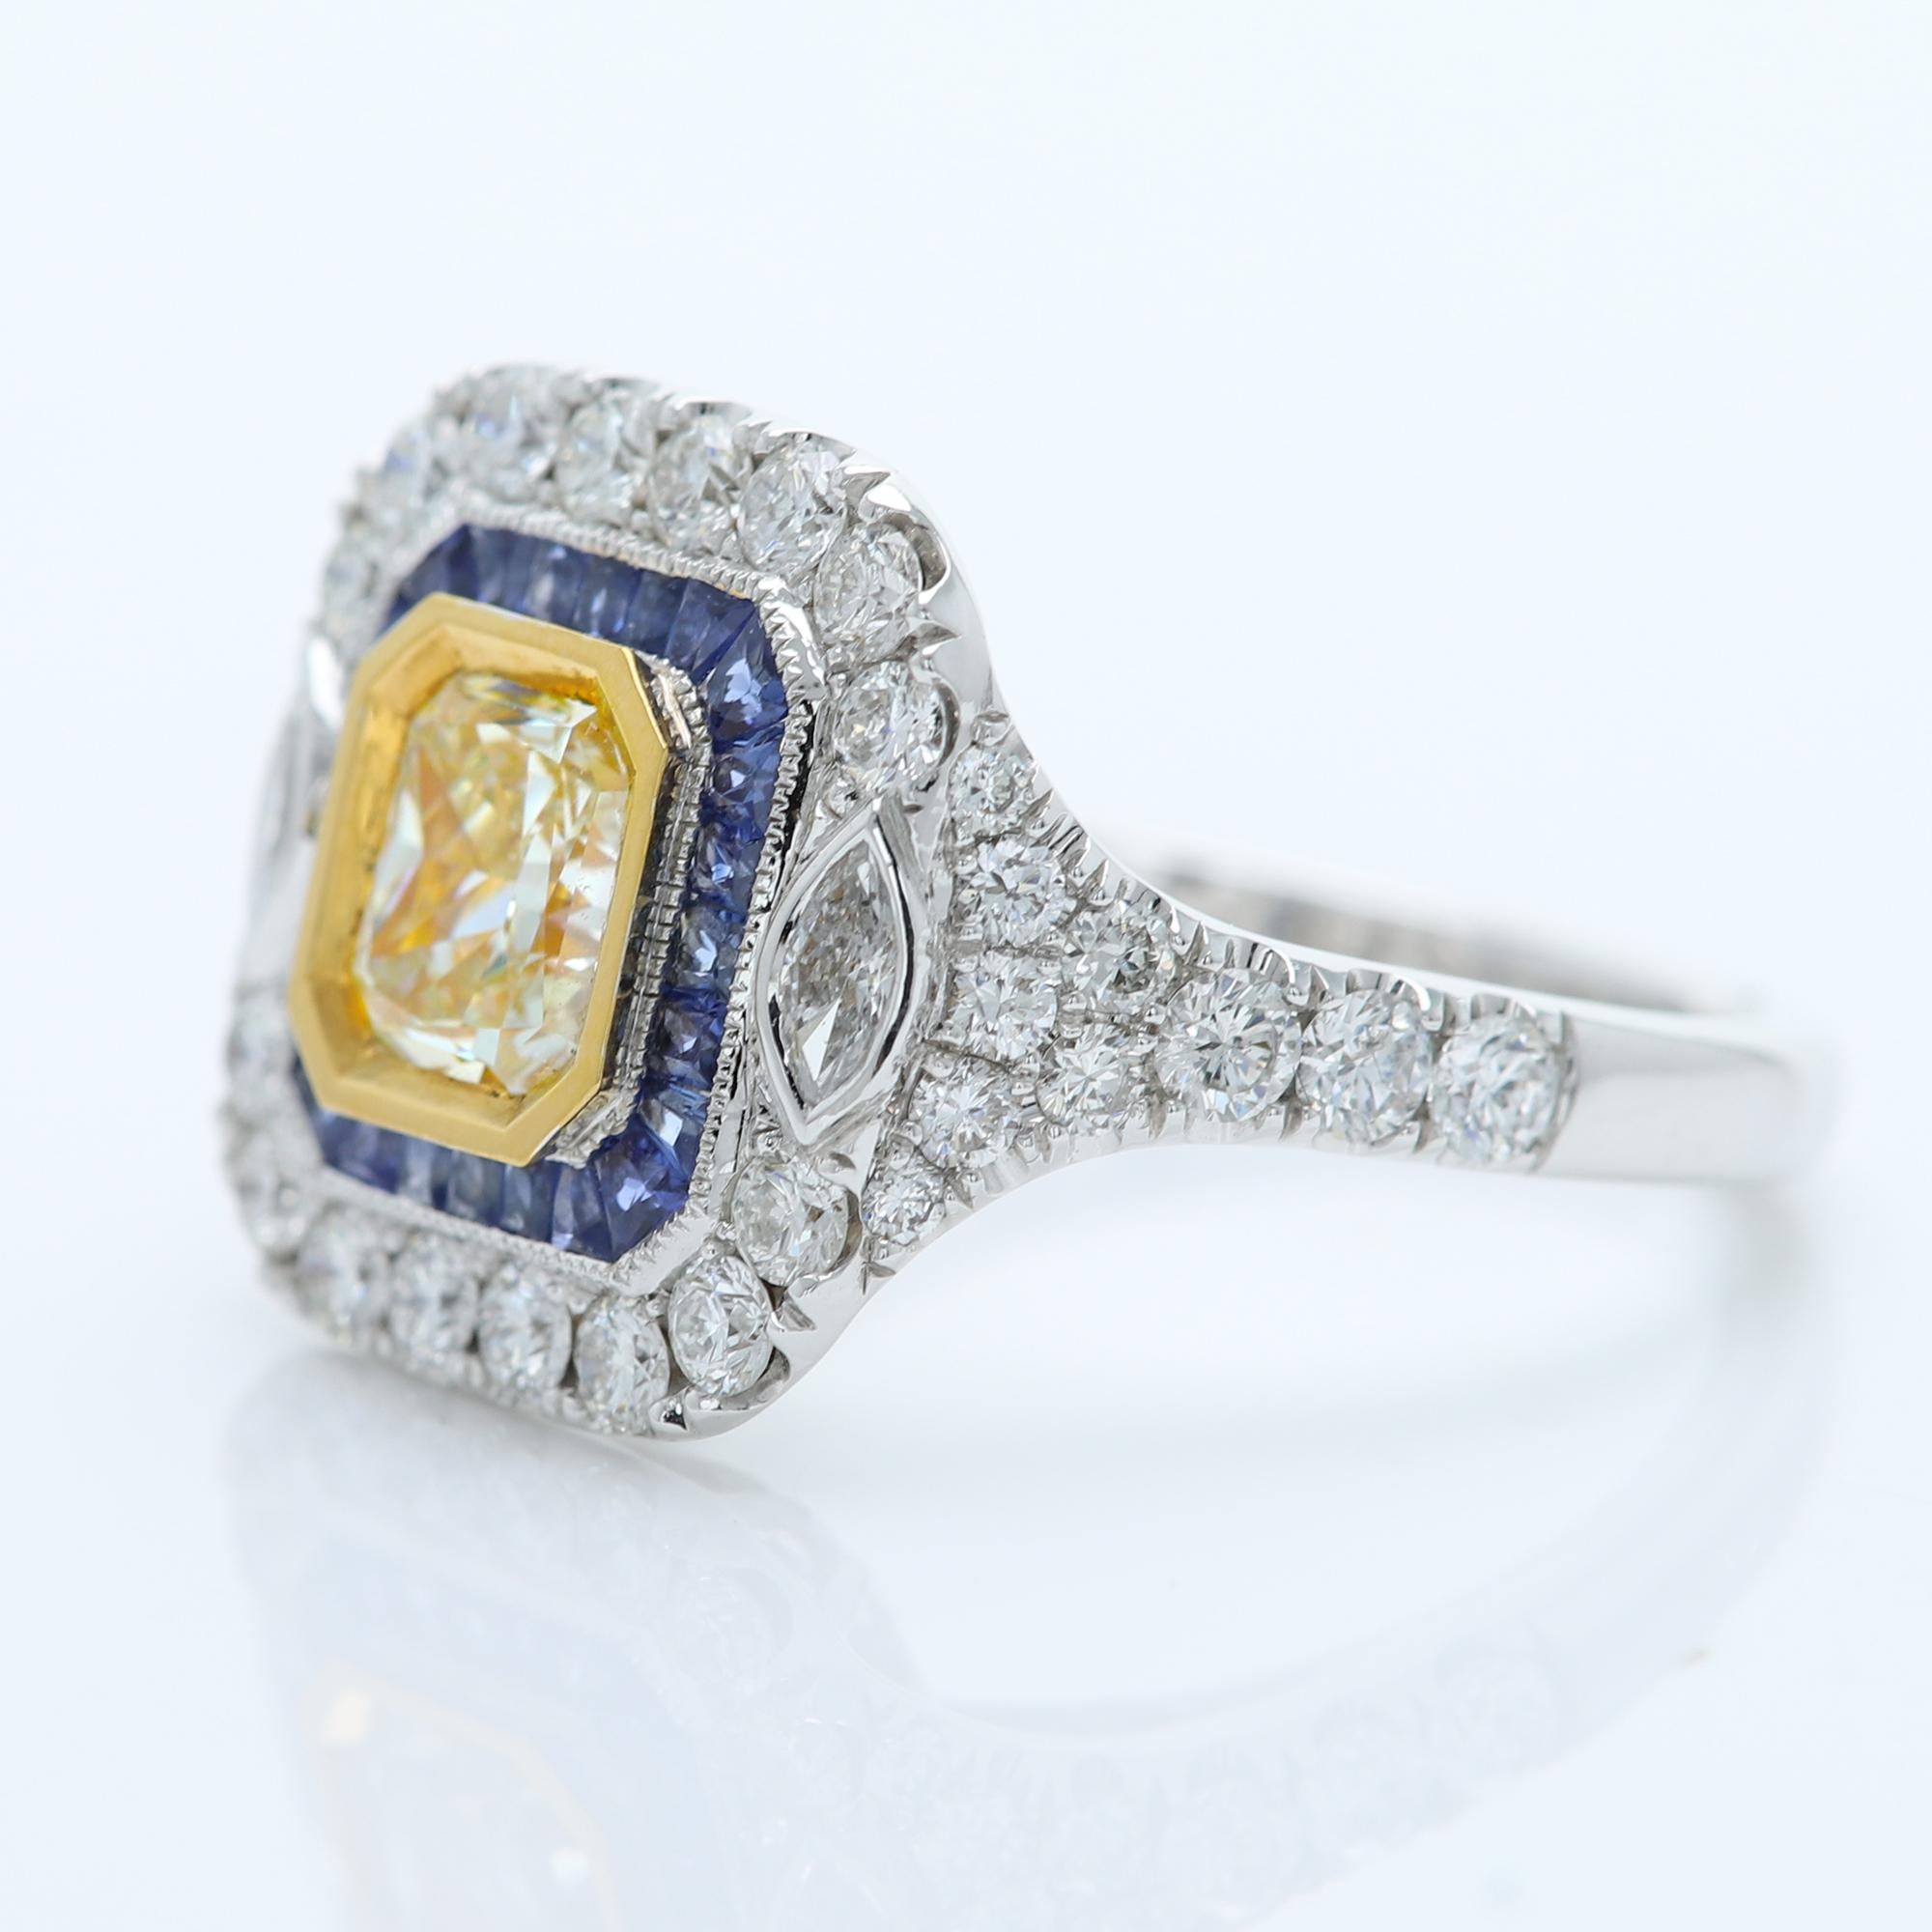 Art Deco Style & Bold Statement Colorful Ring
Center is Yellow Diamond surrounded with Blue Sapphire, sides have regular white Diamonds
All stones are Natural
18k Two Tone Gold 
Yellow Diamond size - 1.03 carat (7x6 mm) -SI
Small Diamonds 1.11 carat